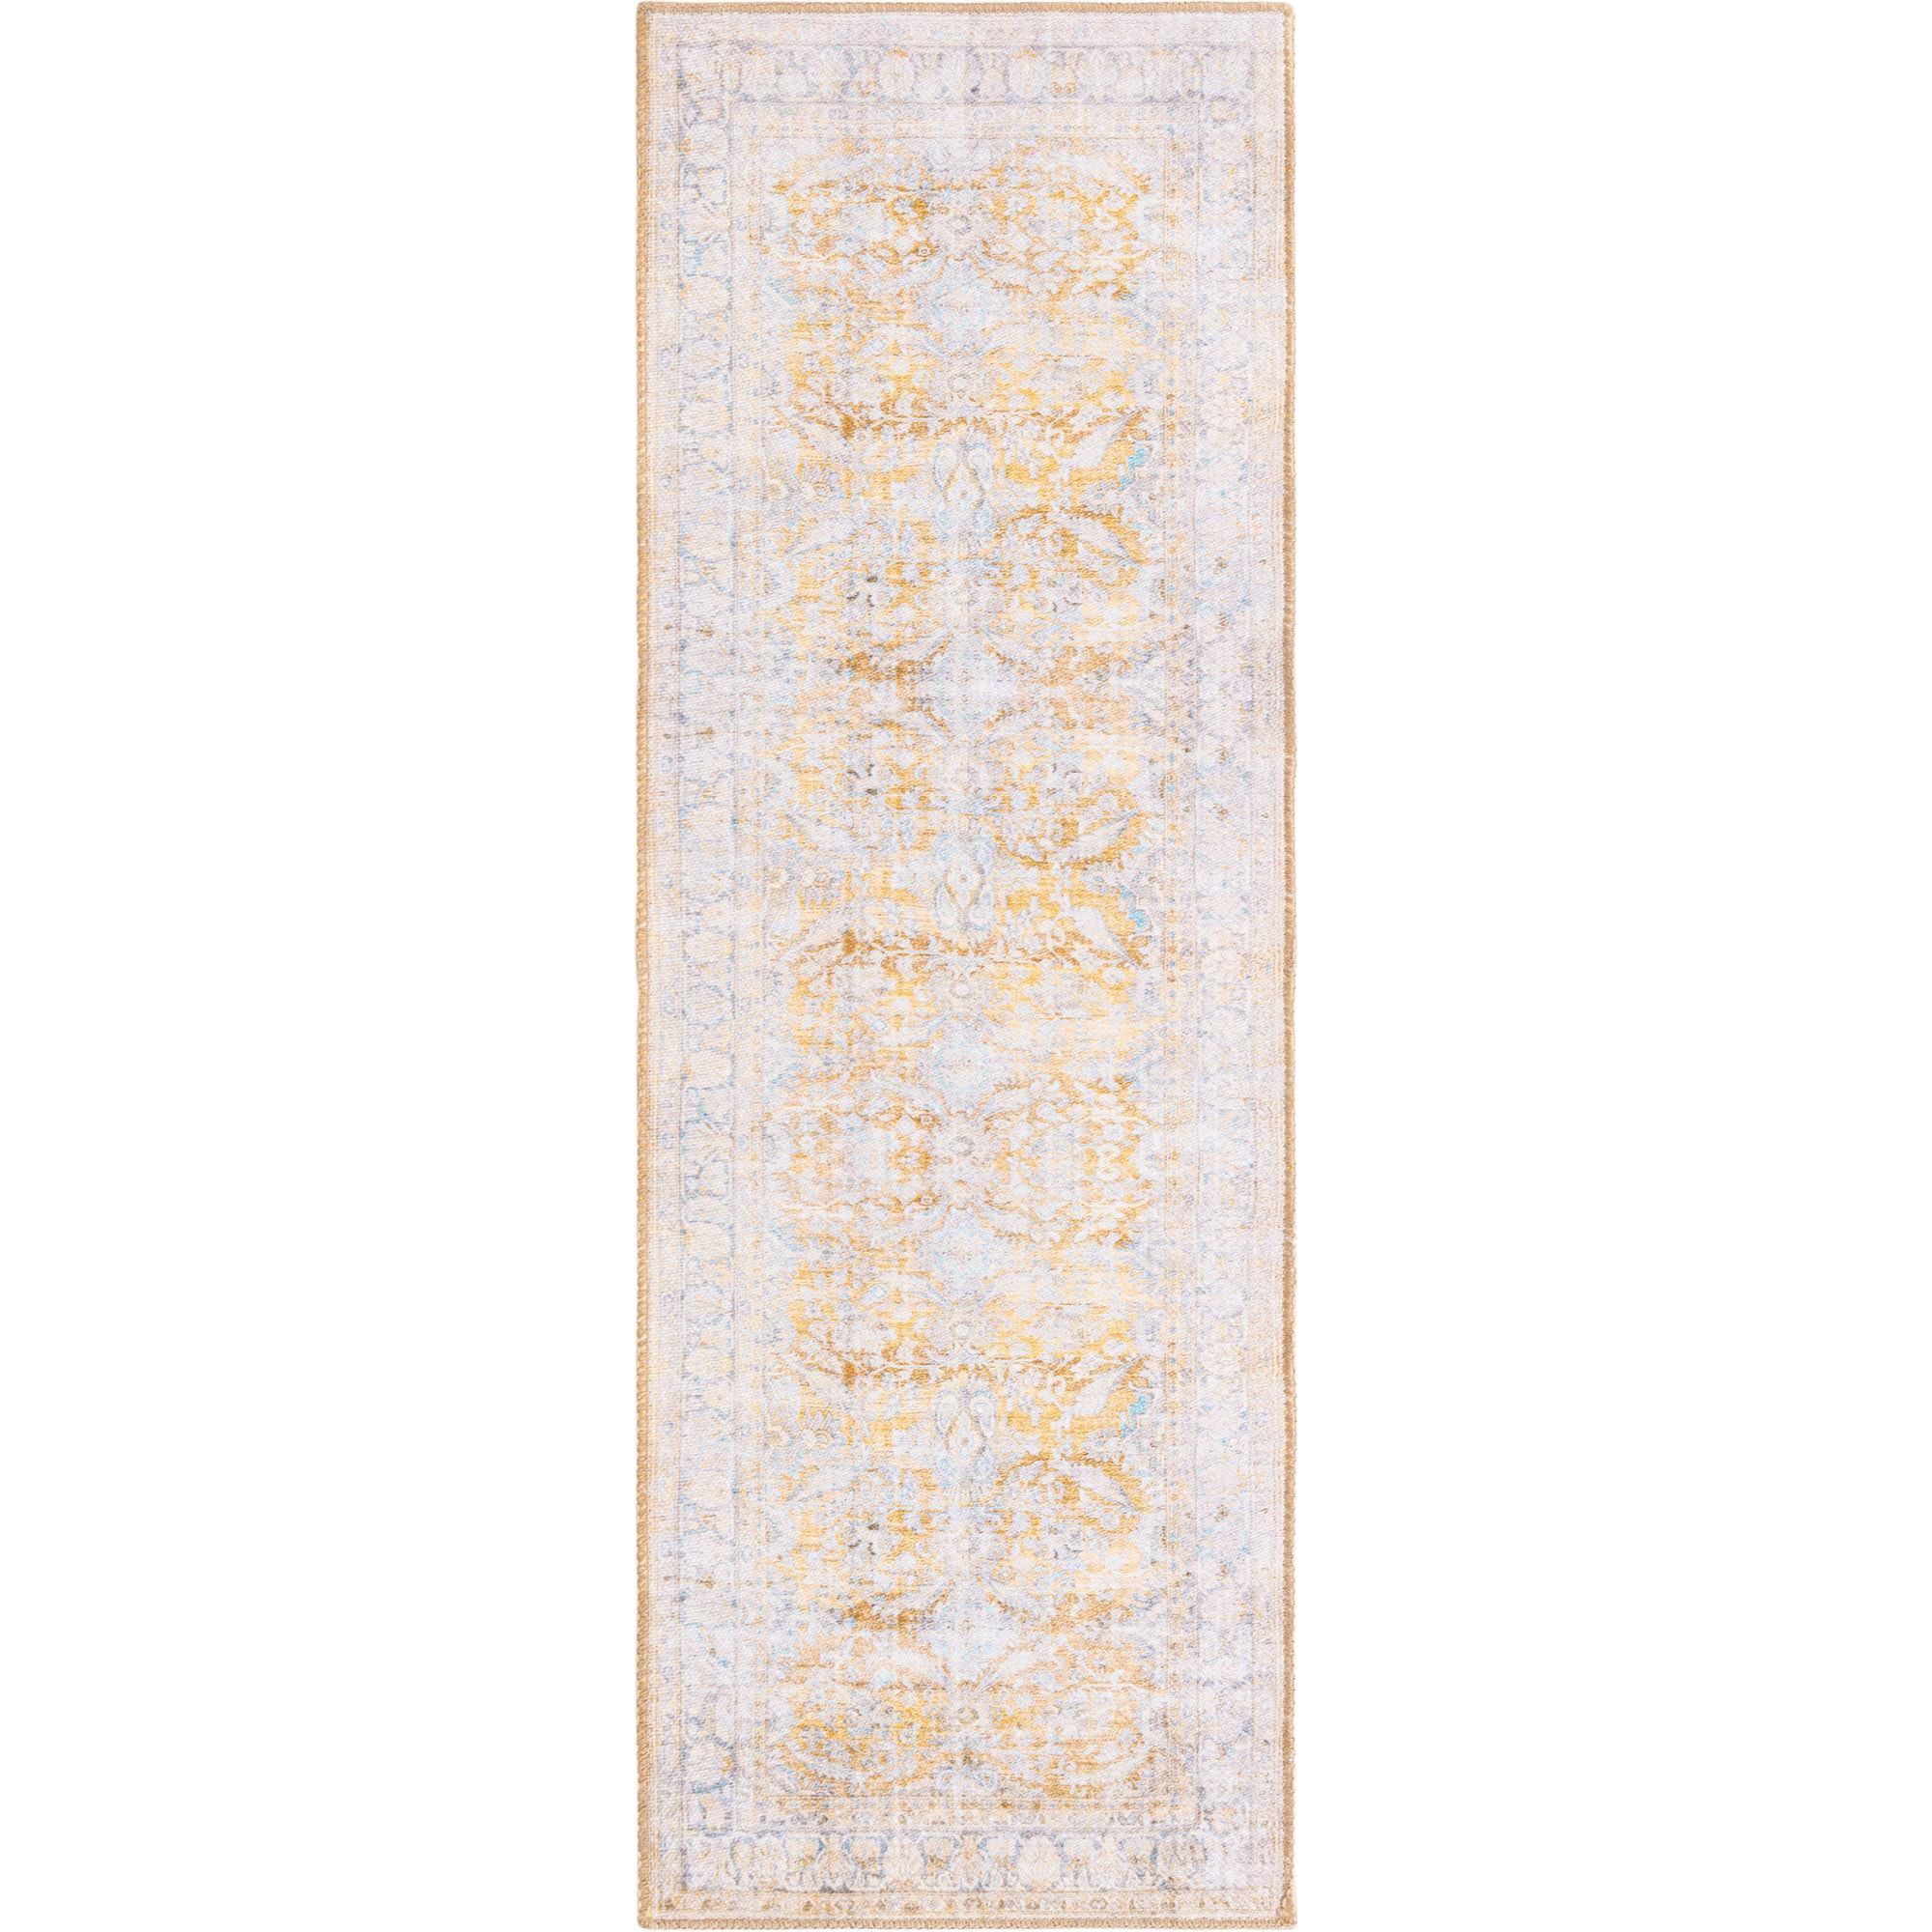 2' 6 x 12' 0 Unique Loom Revival Collection Traditional Medallion Border Rust Red/Blue Runner Rug